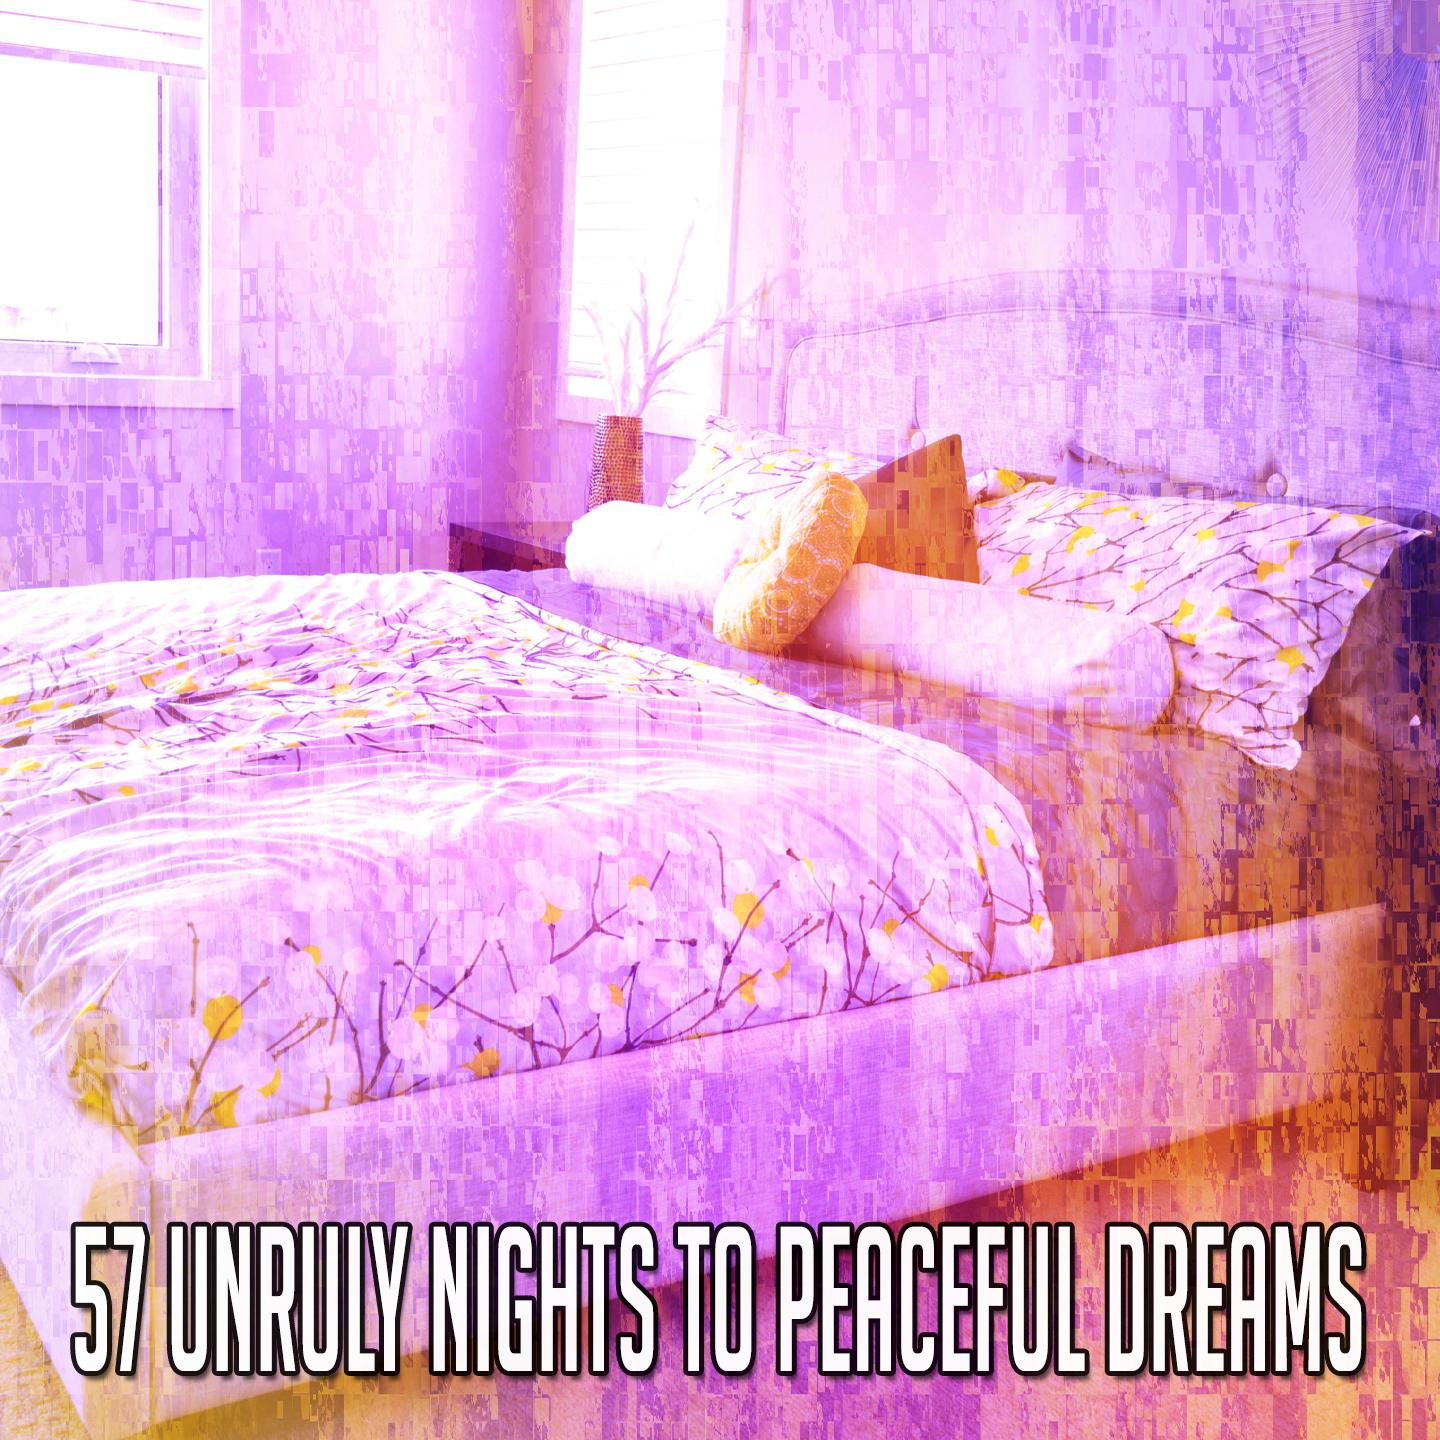 57 Unruly Nights to Peaceful Dreams